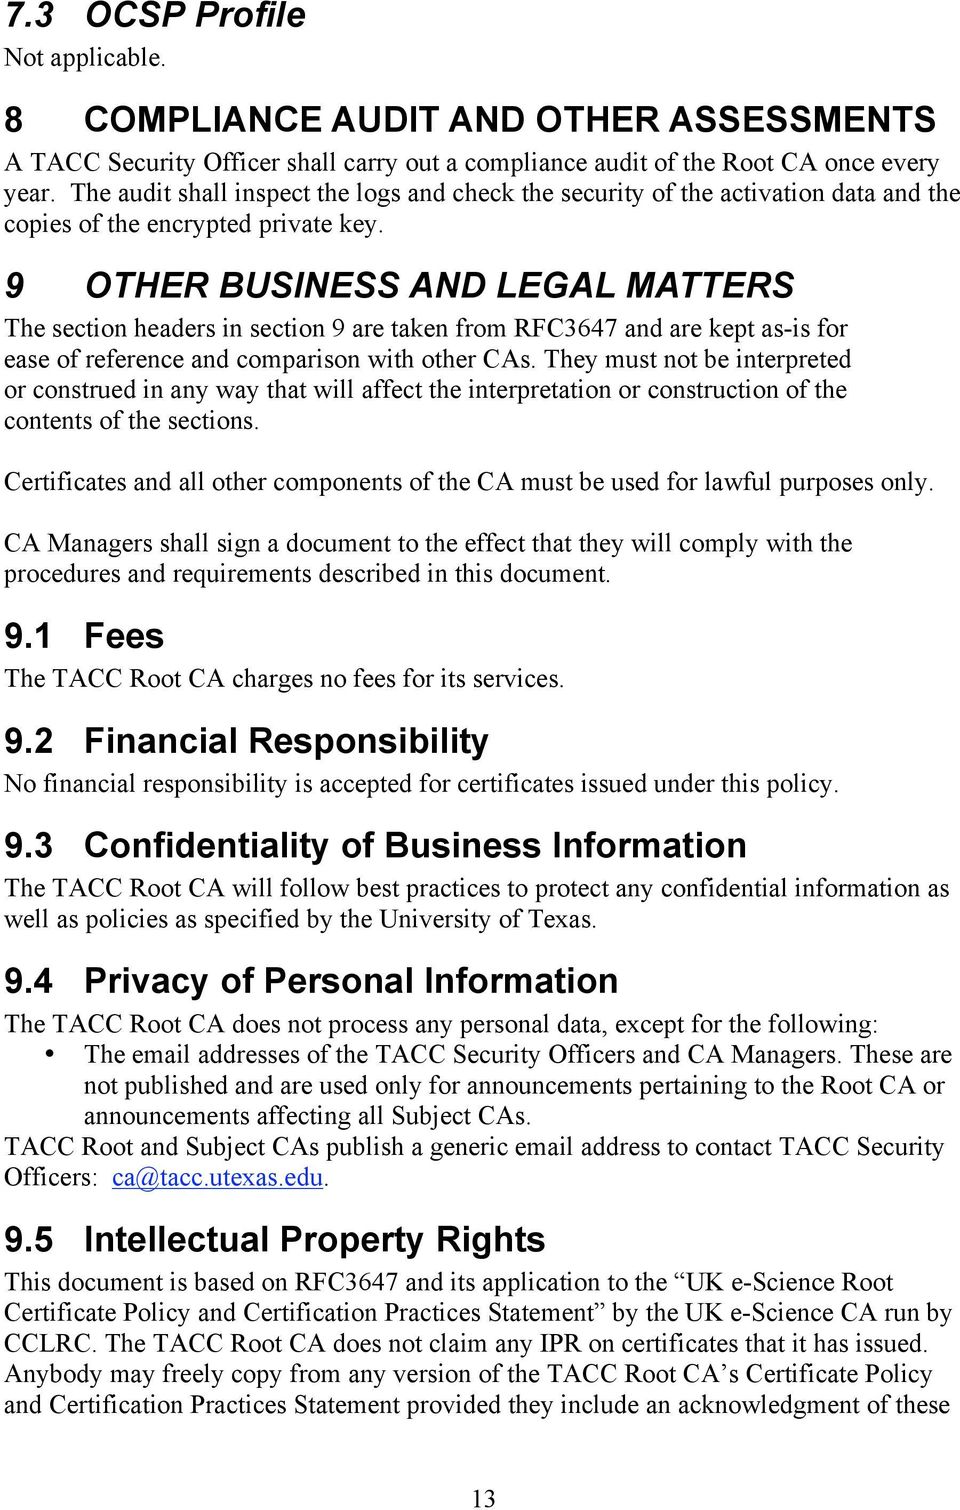 9 OTHER BUSINESS AND LEGAL MATTERS The section headers in section 9 are taken from RFC3647 and are kept as-is for ease of reference and comparison with other CAs.